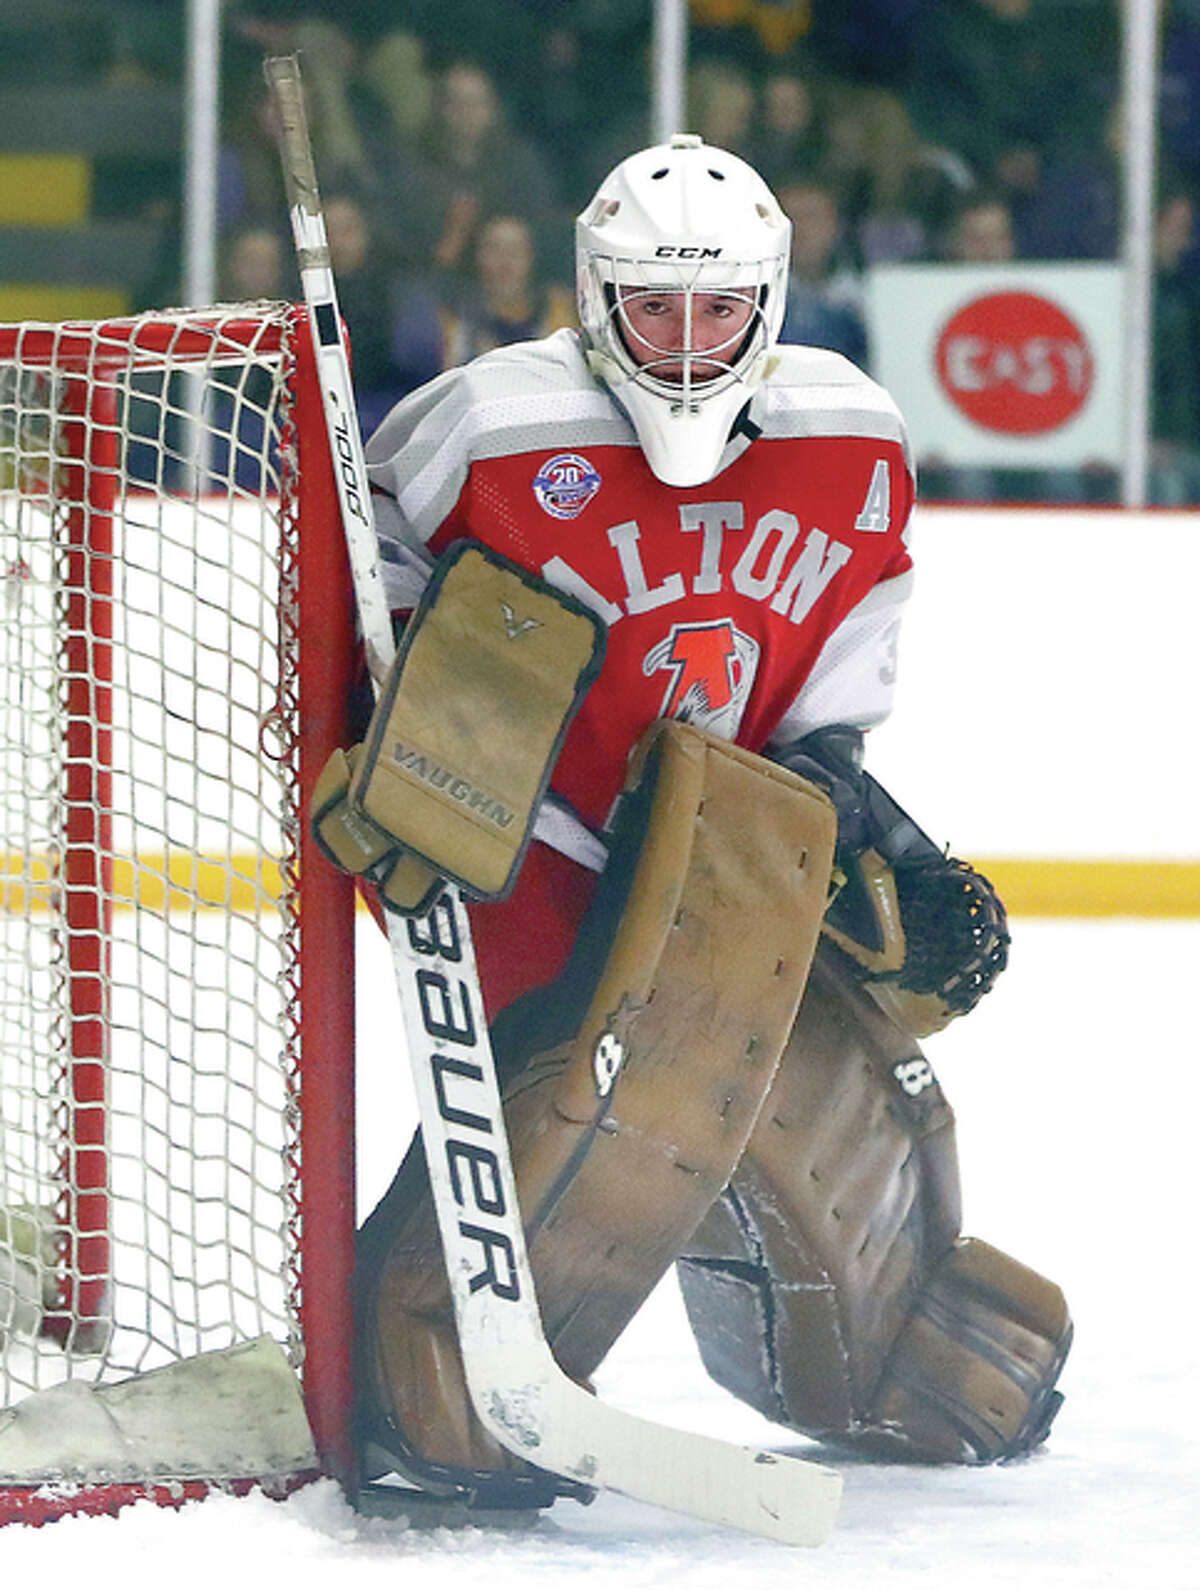 Alton’s Caleb Currie made 27 saves in his team’s 3-1 victory over first-place Belleville in a Class 1A game Thursday night at the East Alton Ice Arena.